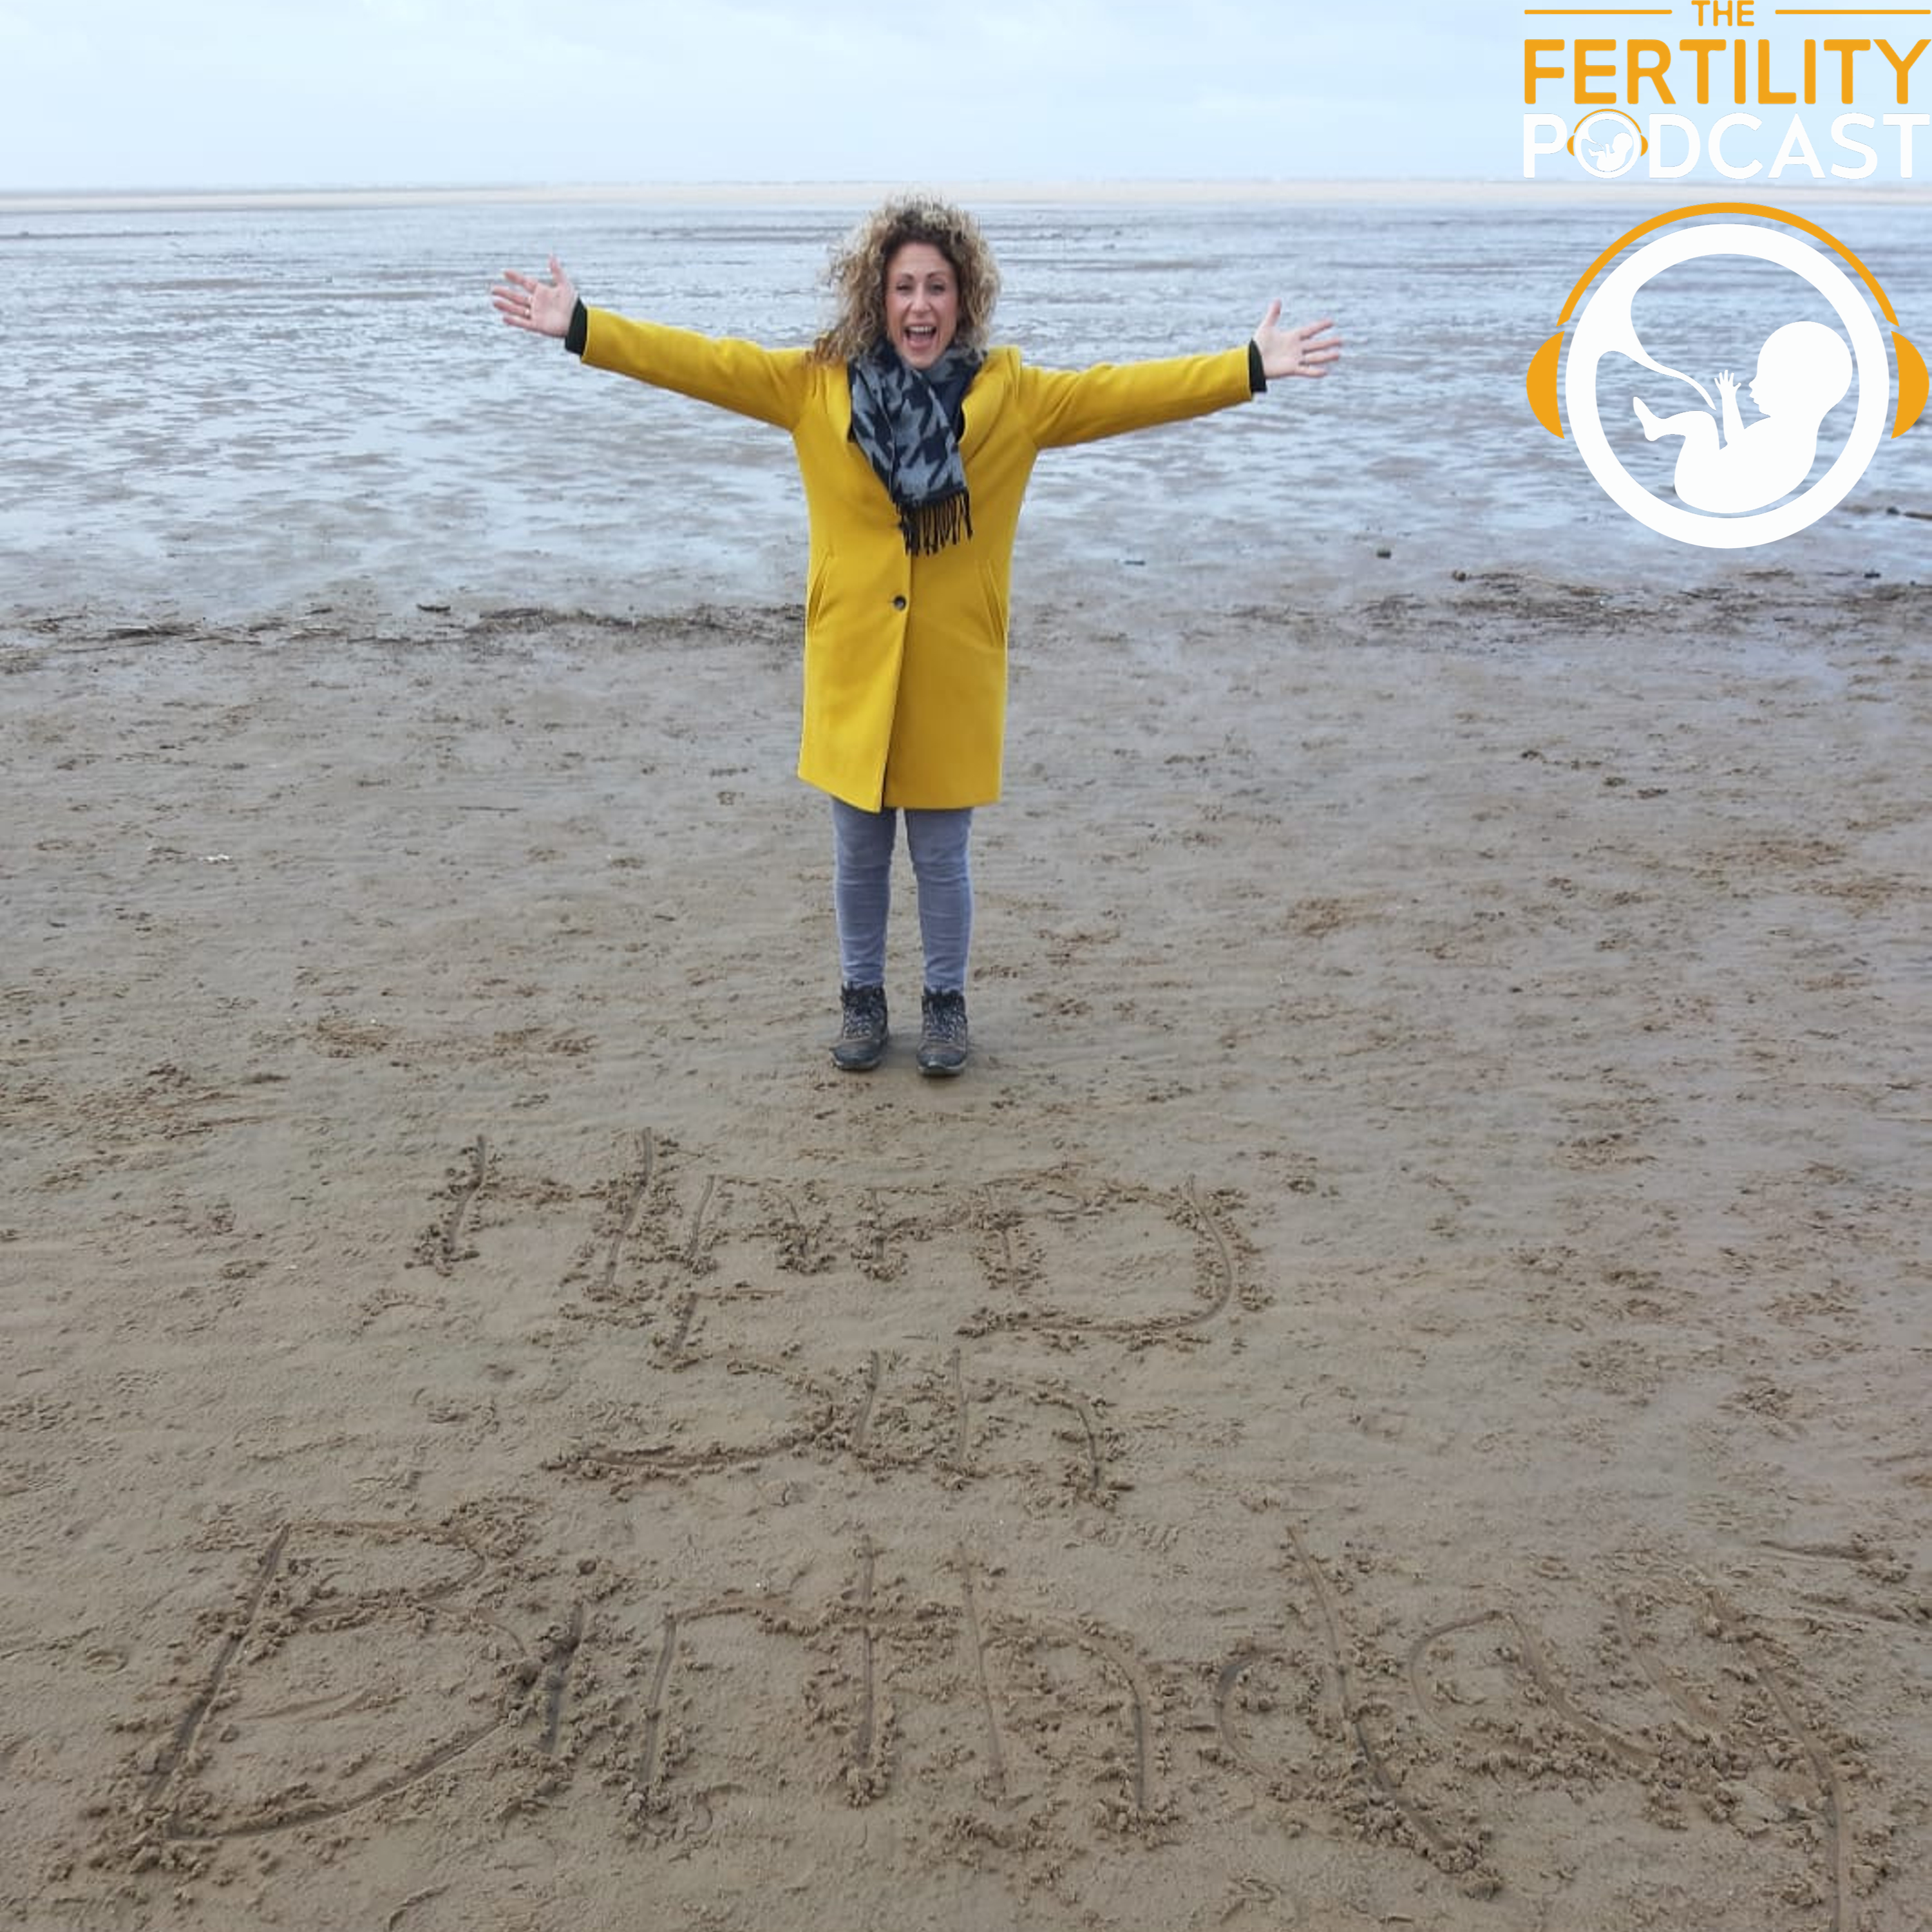 The Fertility Podcast is 5!